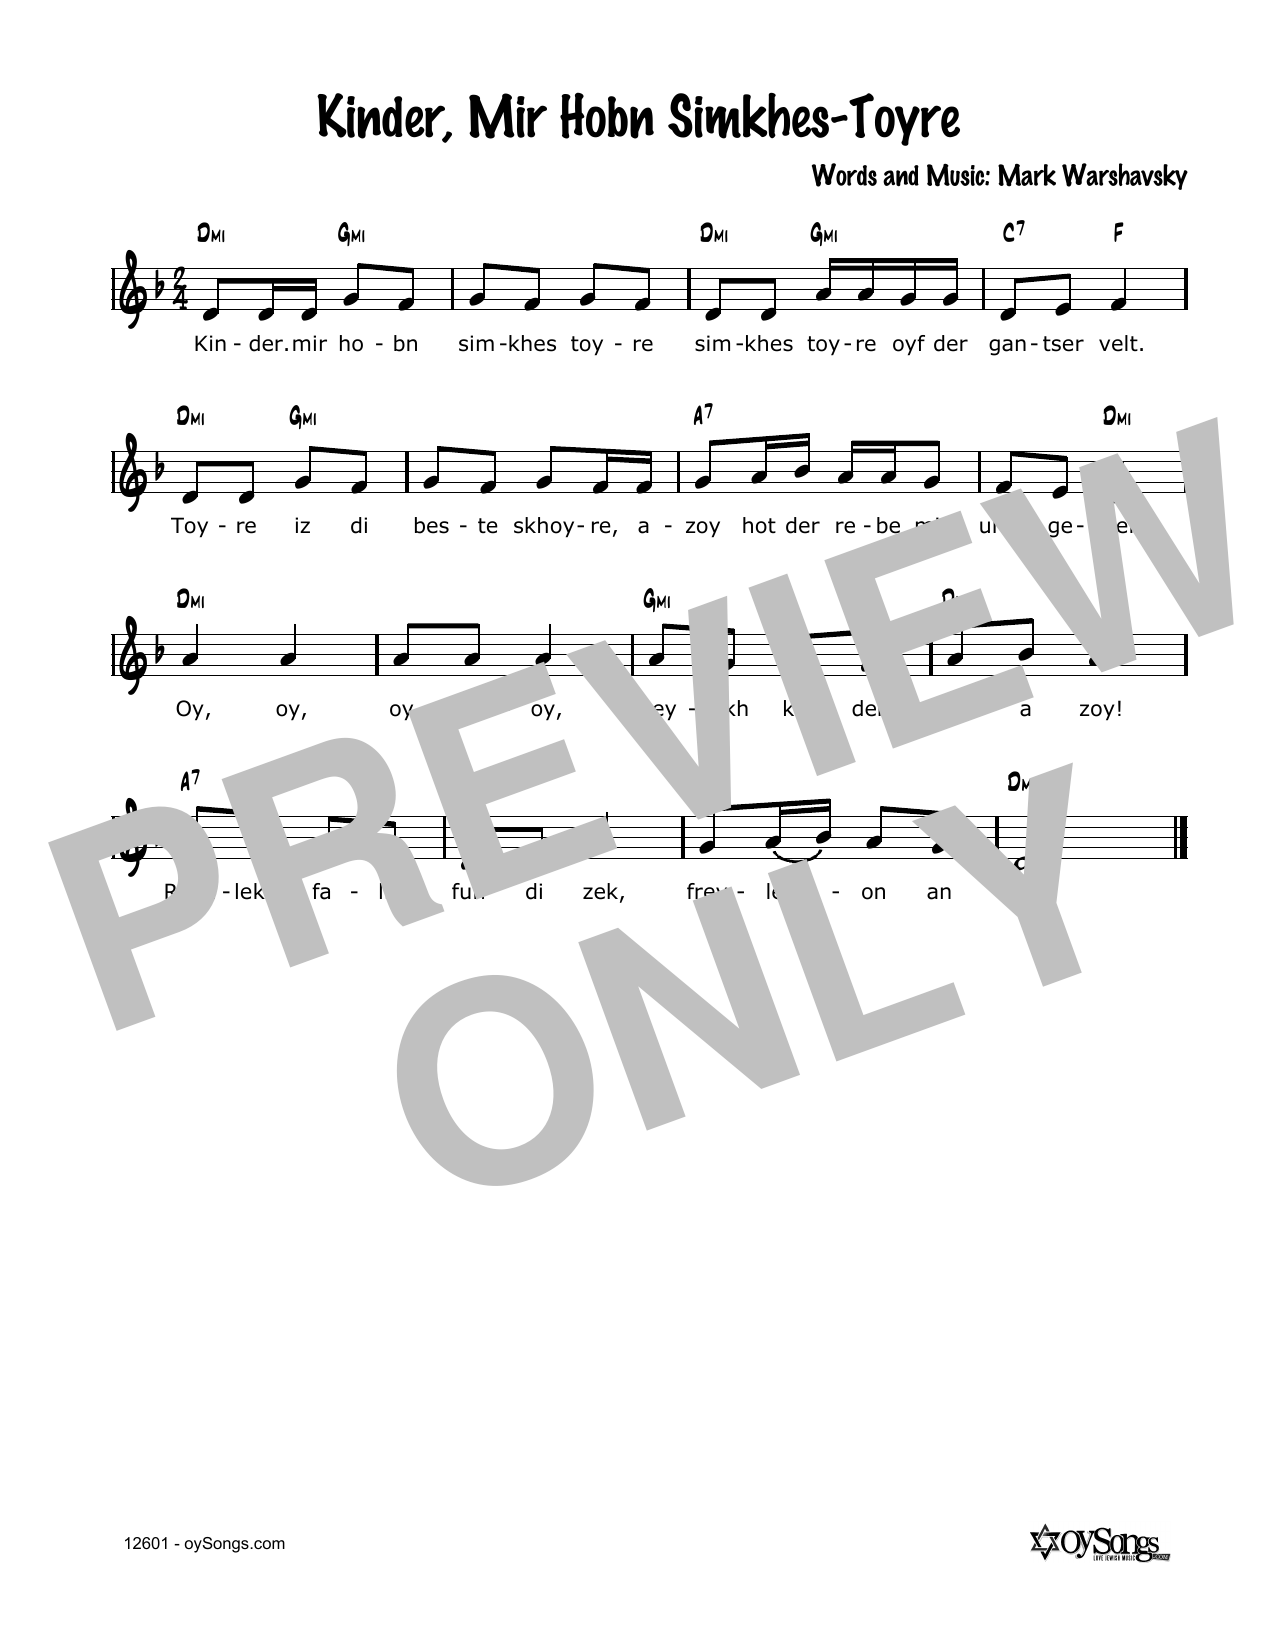 Download Cindy Paley Kinder, Mir Hobn Simkhes-Toyre Sheet Music